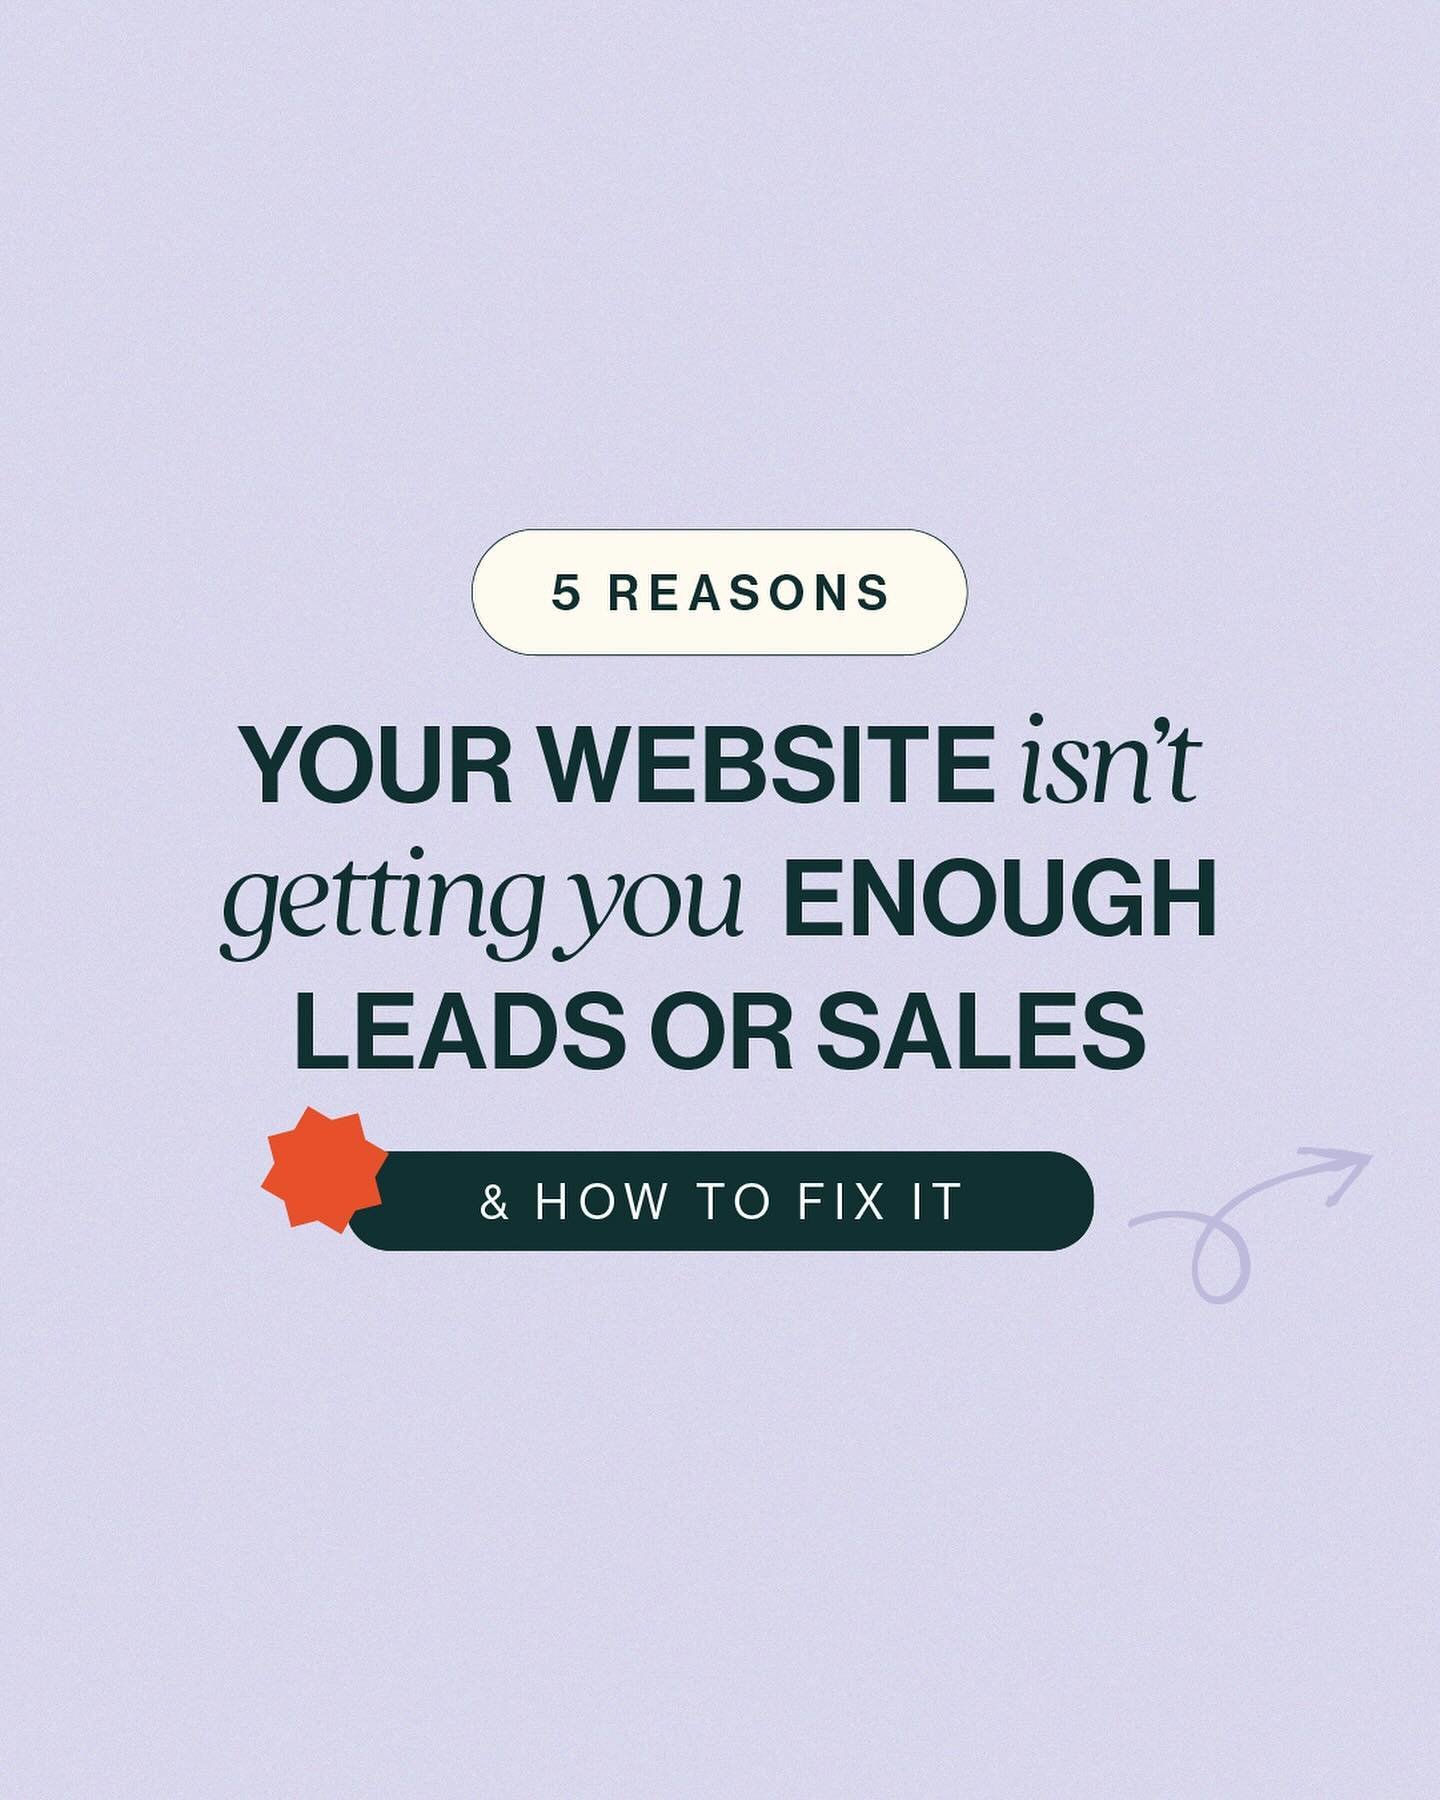 Want more leads and sales from your website? 🤑

DUH, of course you do 

Here are some not-so-secret ways to boost your website conversions ❤️&zwj;🔥

You&rsquo;re jumping straight into the hard sell 👉 Show off your dazzling personality BEFORE tryin